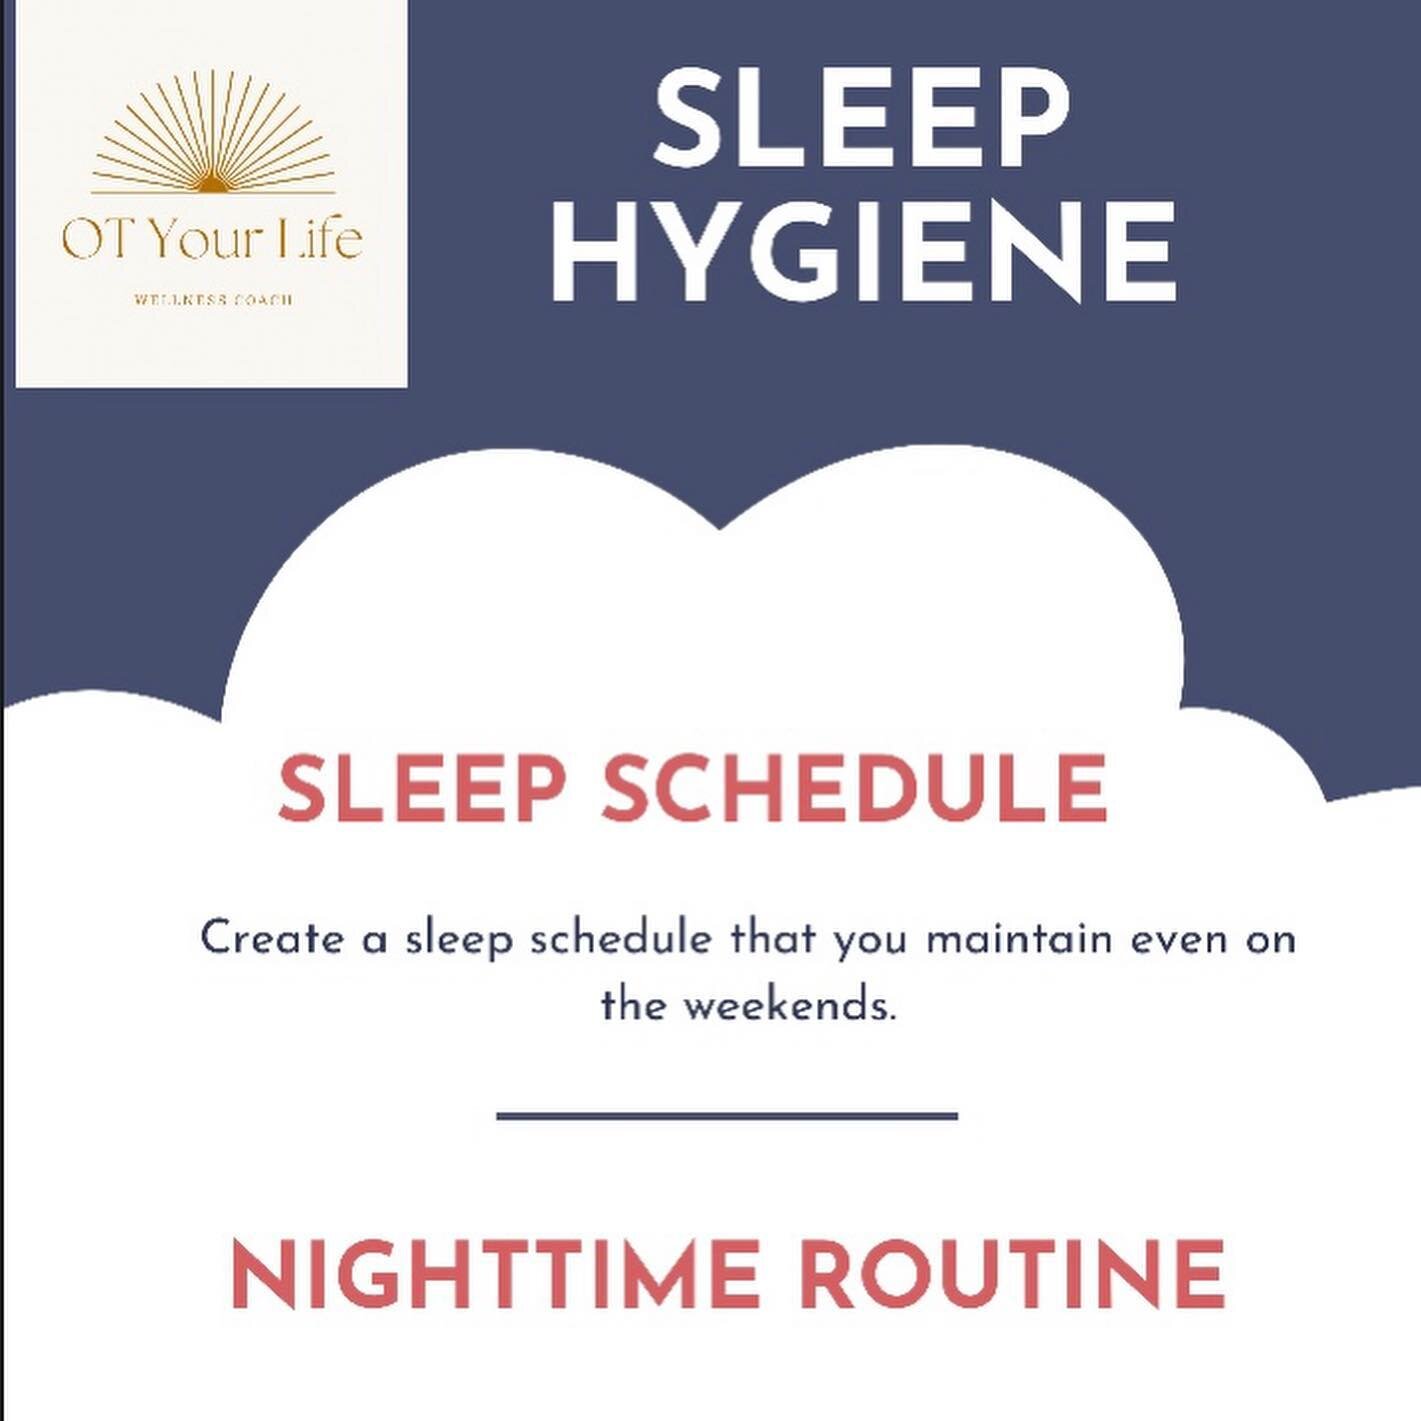 Check out the link in my bio for sleep hygiene tips! 
There you find this infographic and a full blog post about improving your sleep 🐑💤 
.
.
.
#otyourlife #OT #sleep #occupationaltherapy #sleephygiene #healthcoach #healthcoaching #healthy #healtha